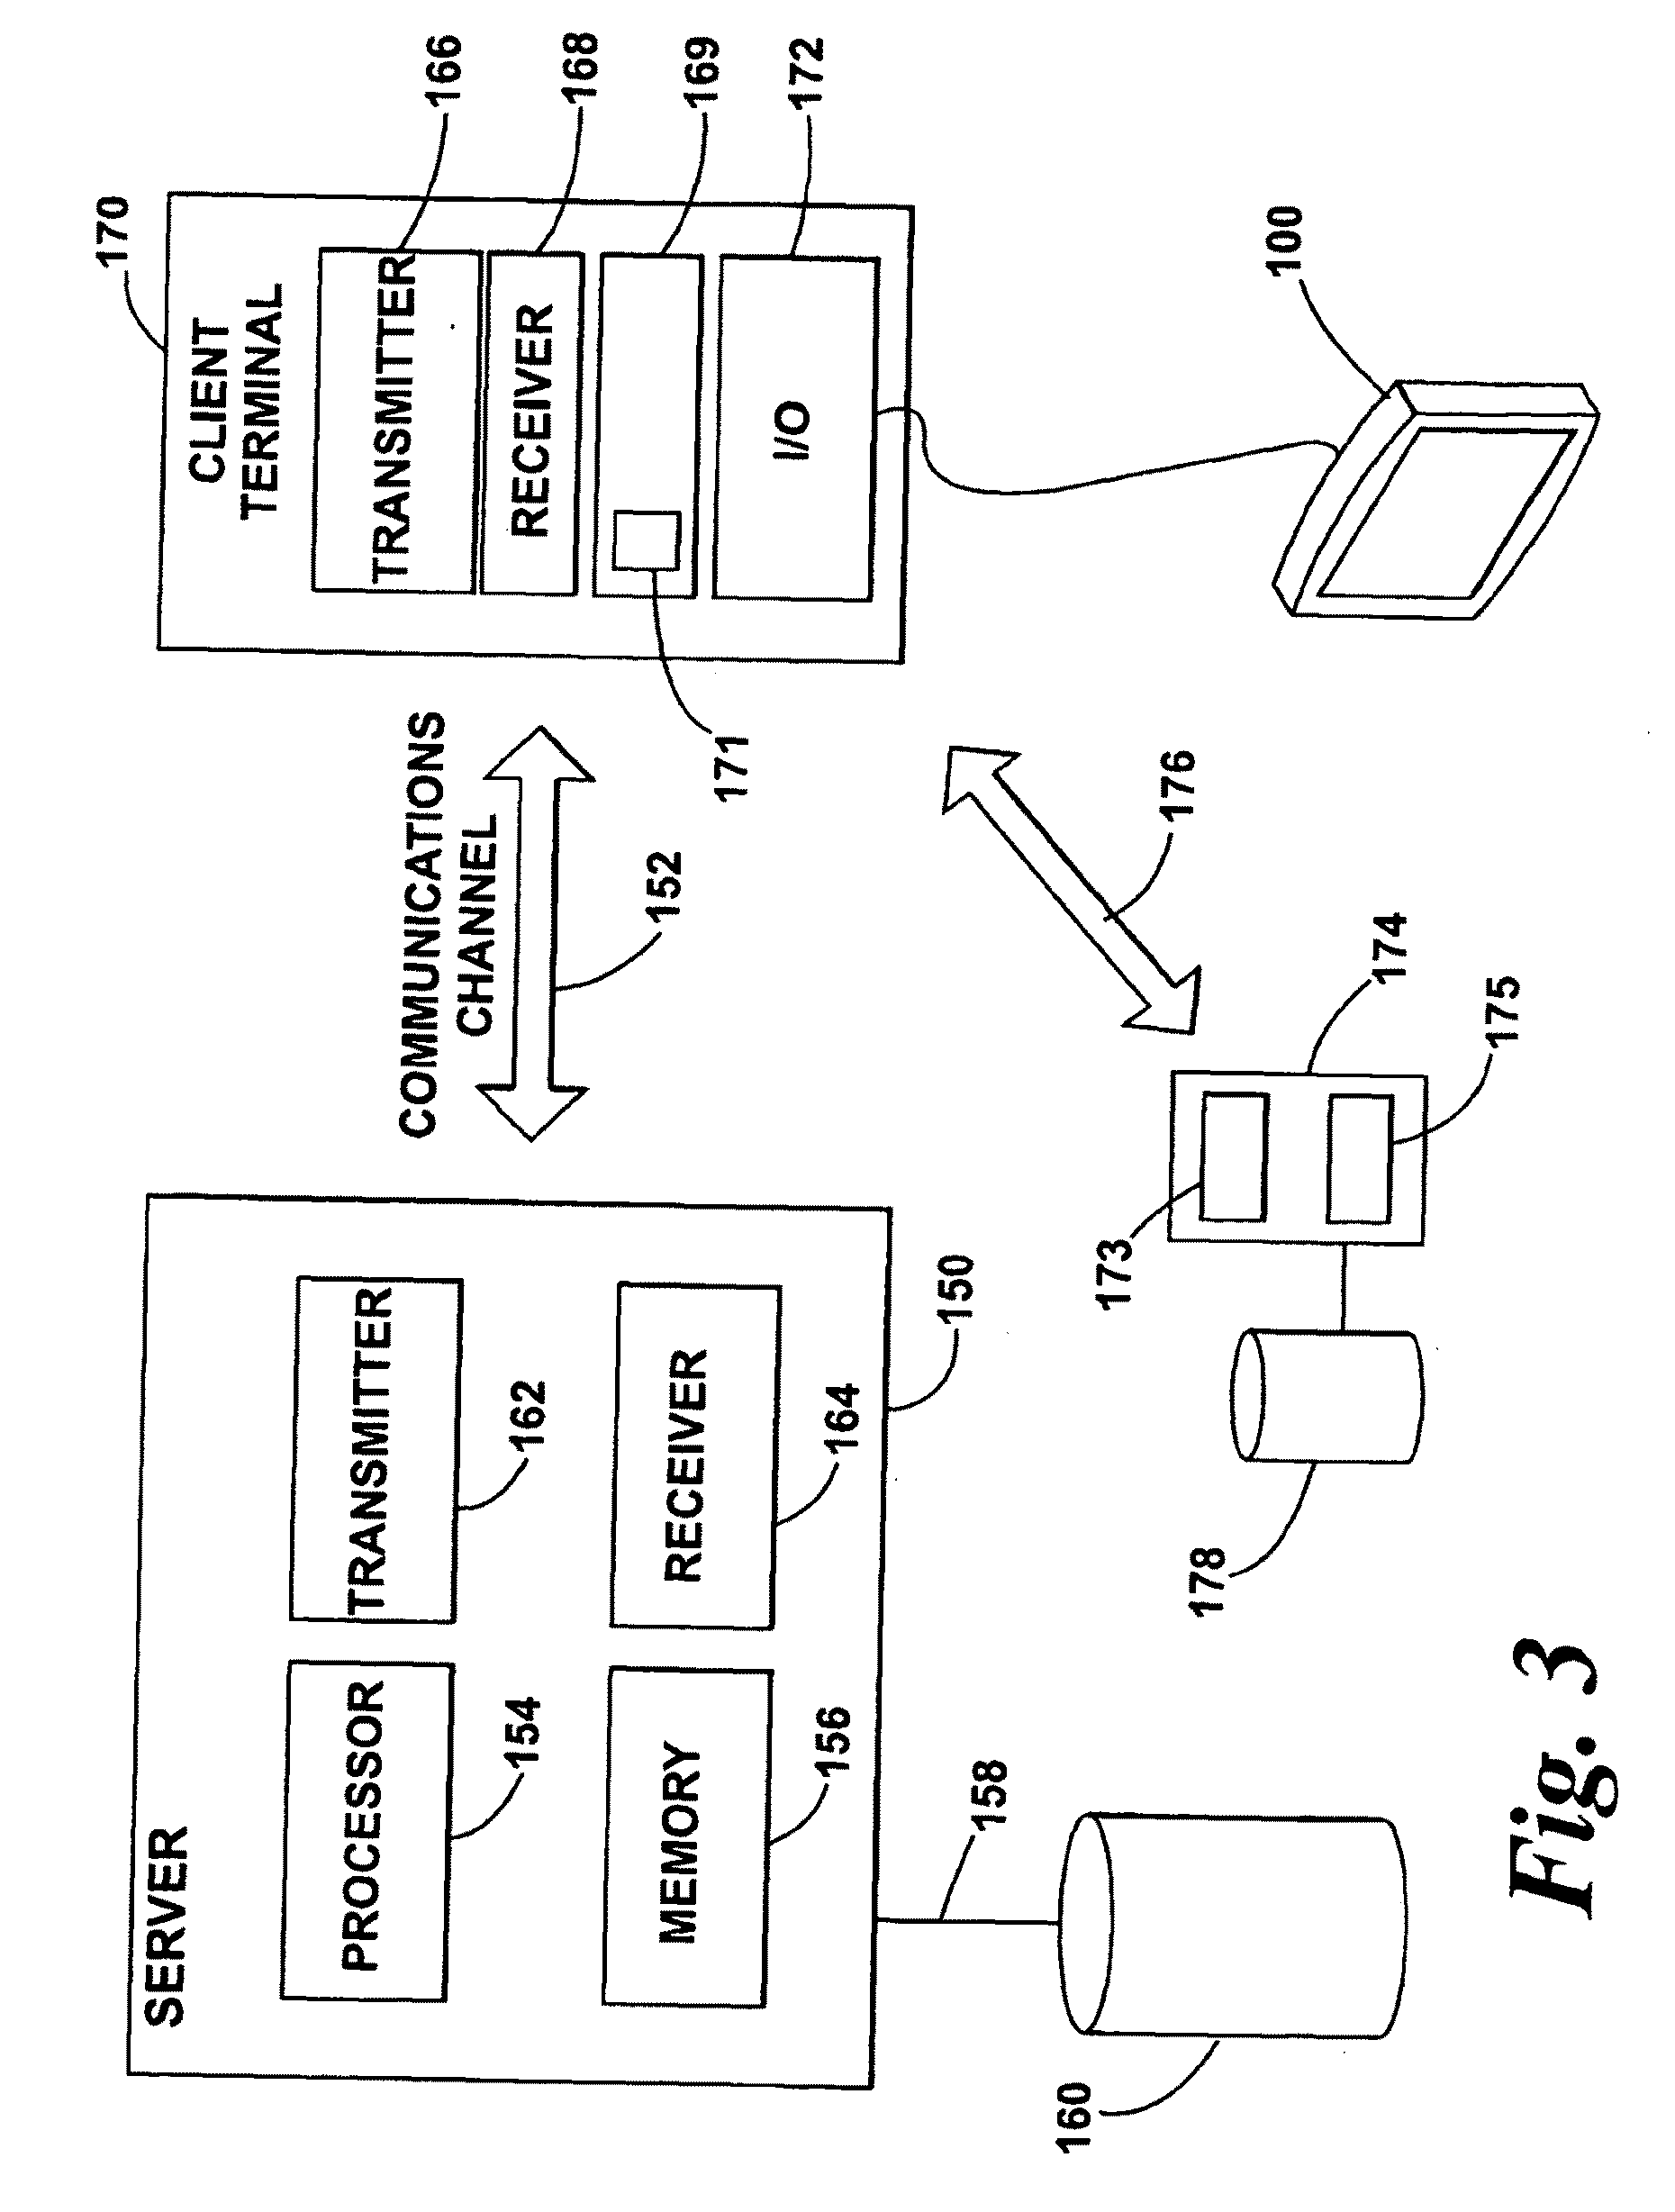 Location data processing apparatus and method of importing location information